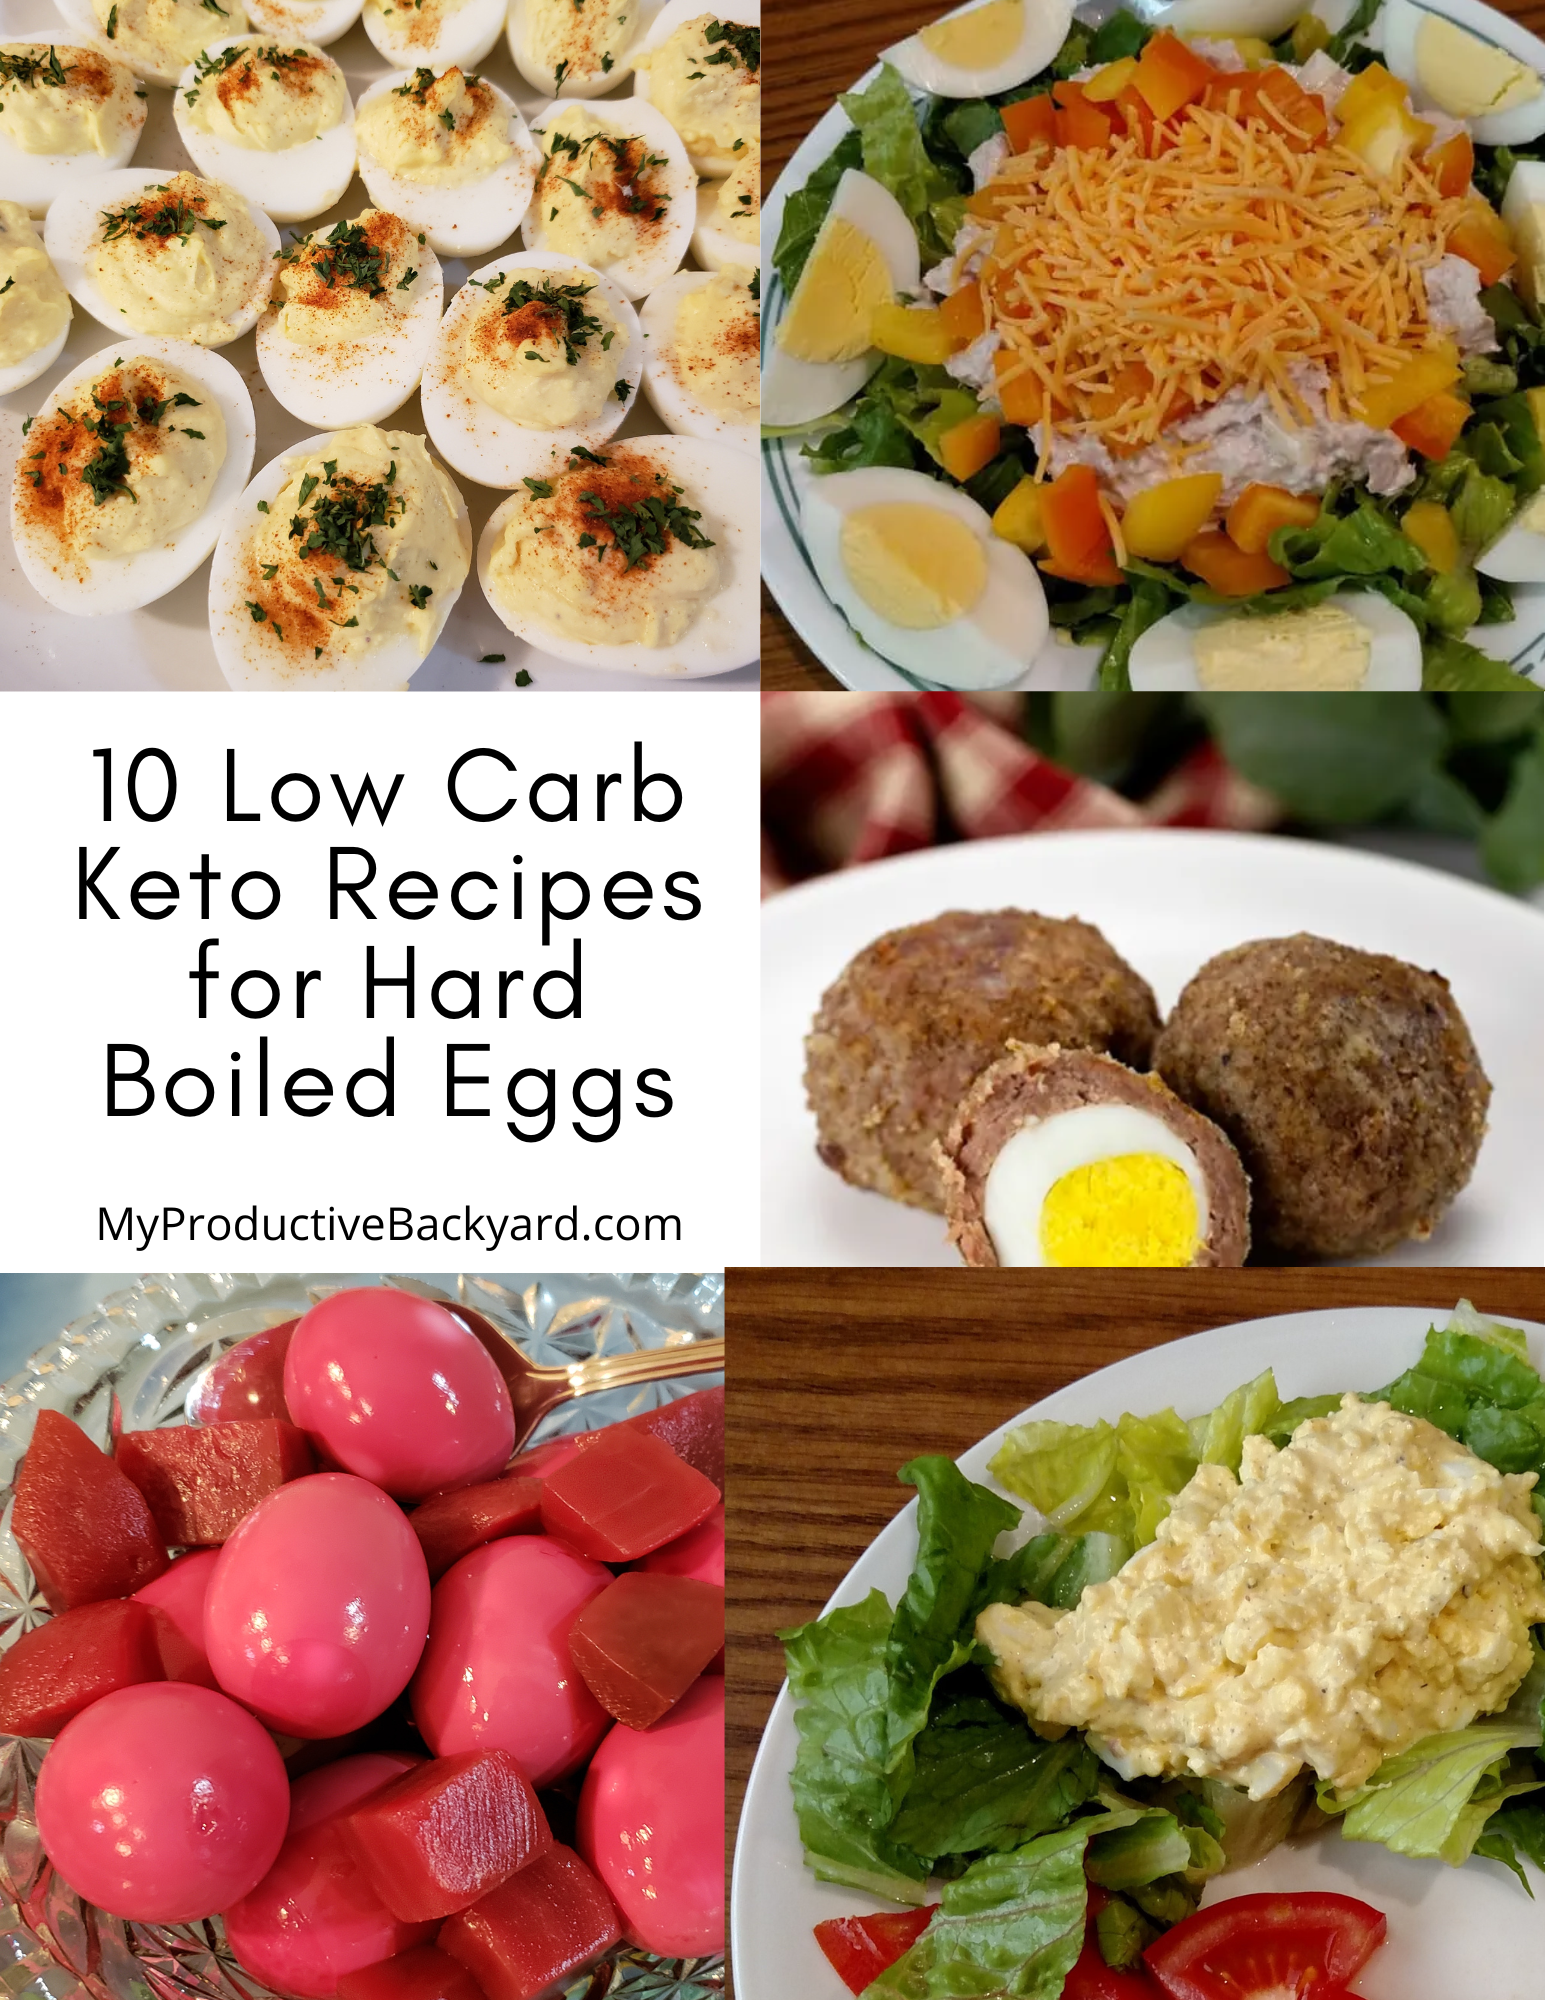 Hard Boiled Eggs - how to cook, store and use them - a Keto snack